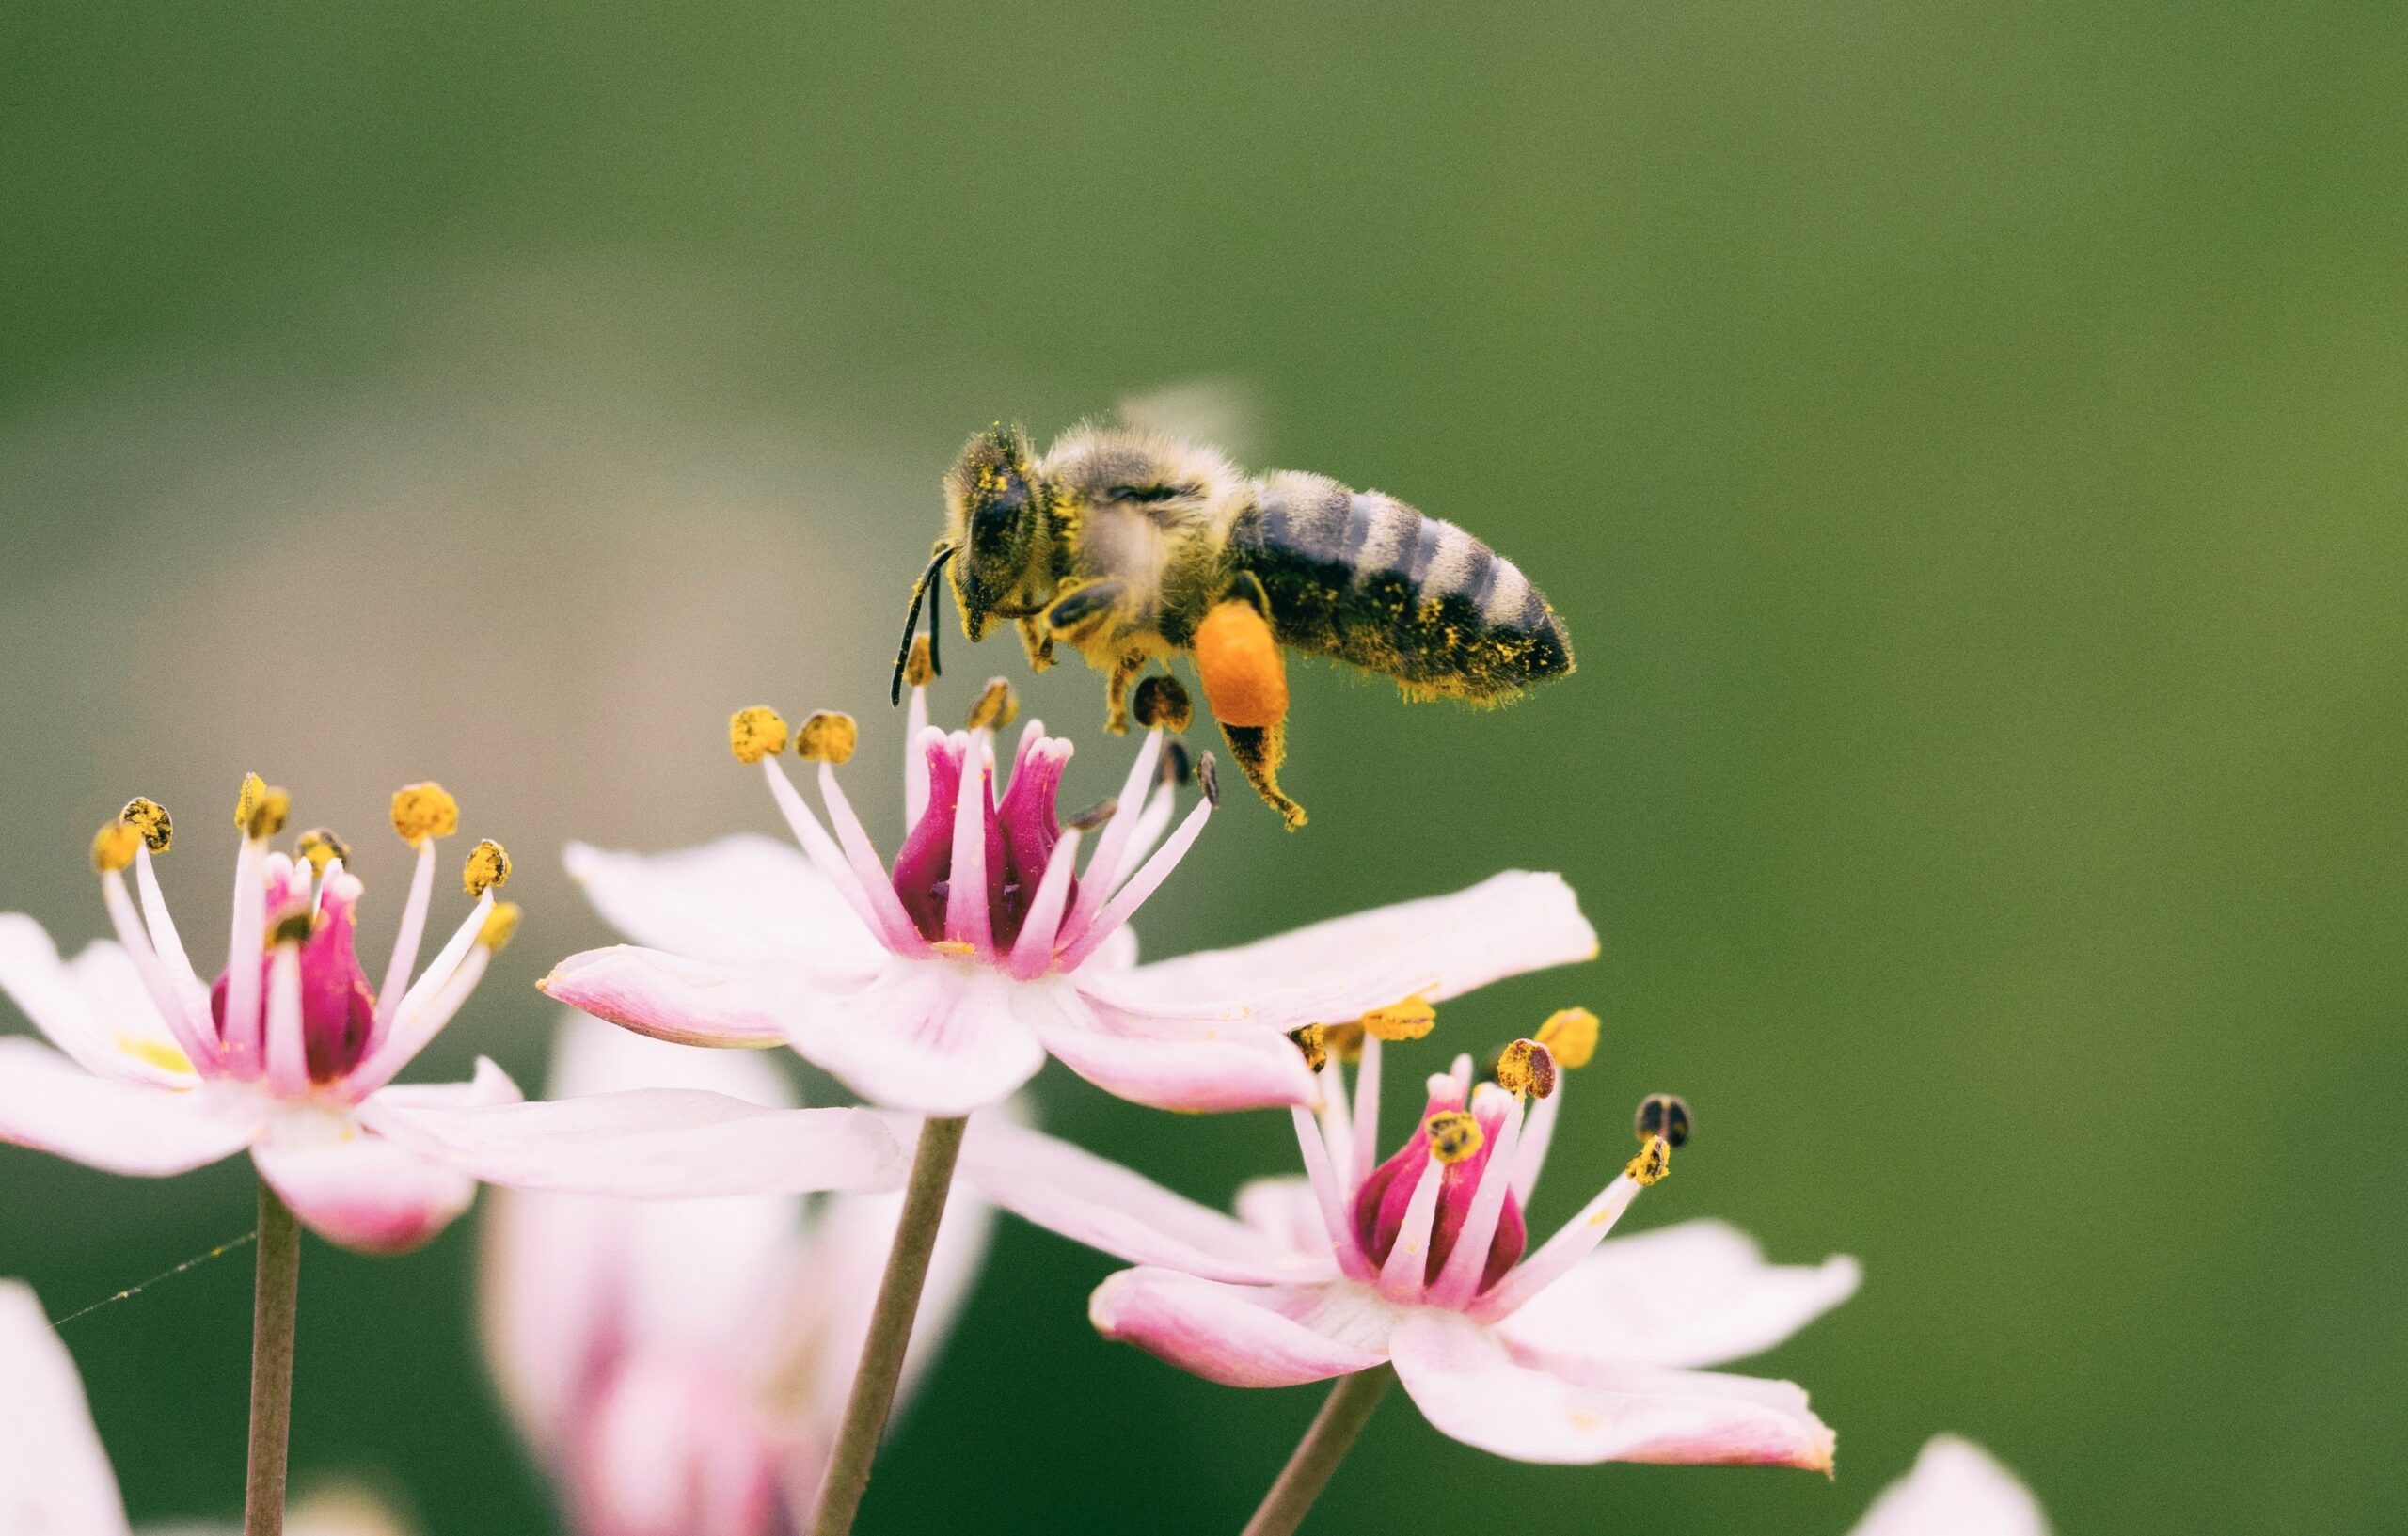 The effects of air pollution on pollinators